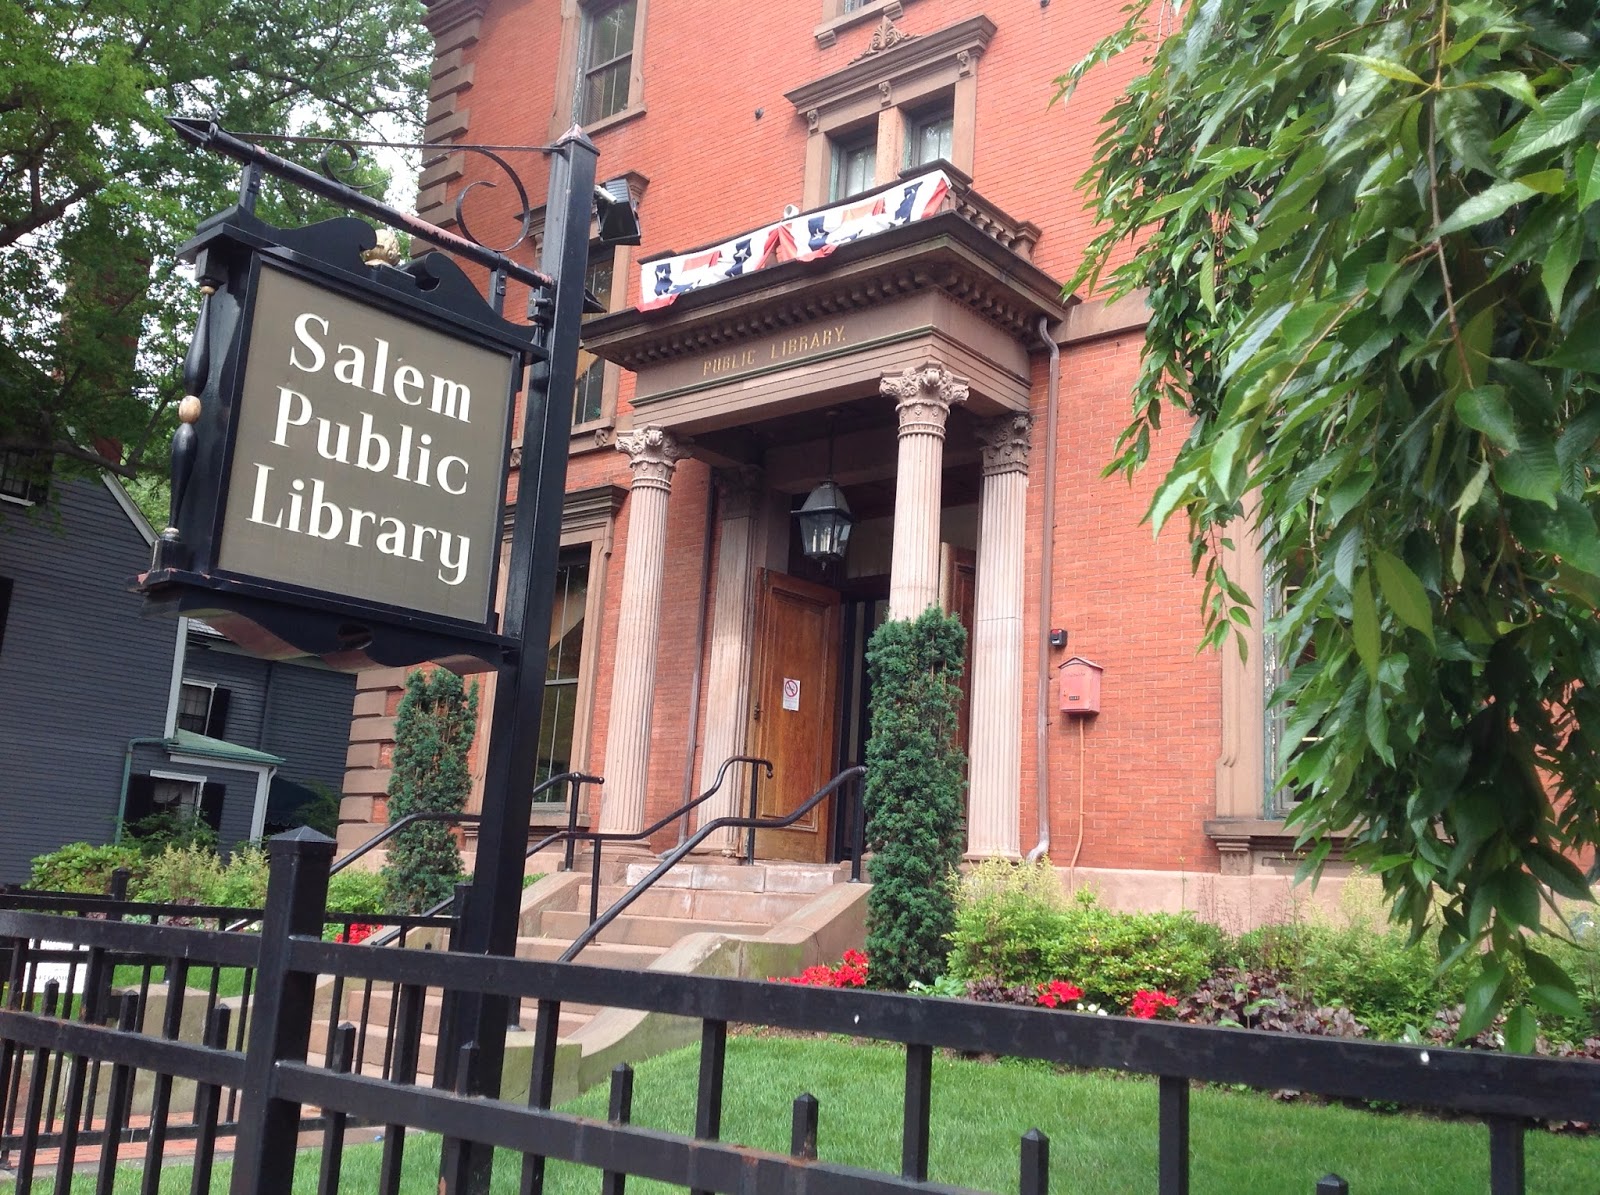 Life From The Roots: Salem Public Library, Salem, Massachusetts